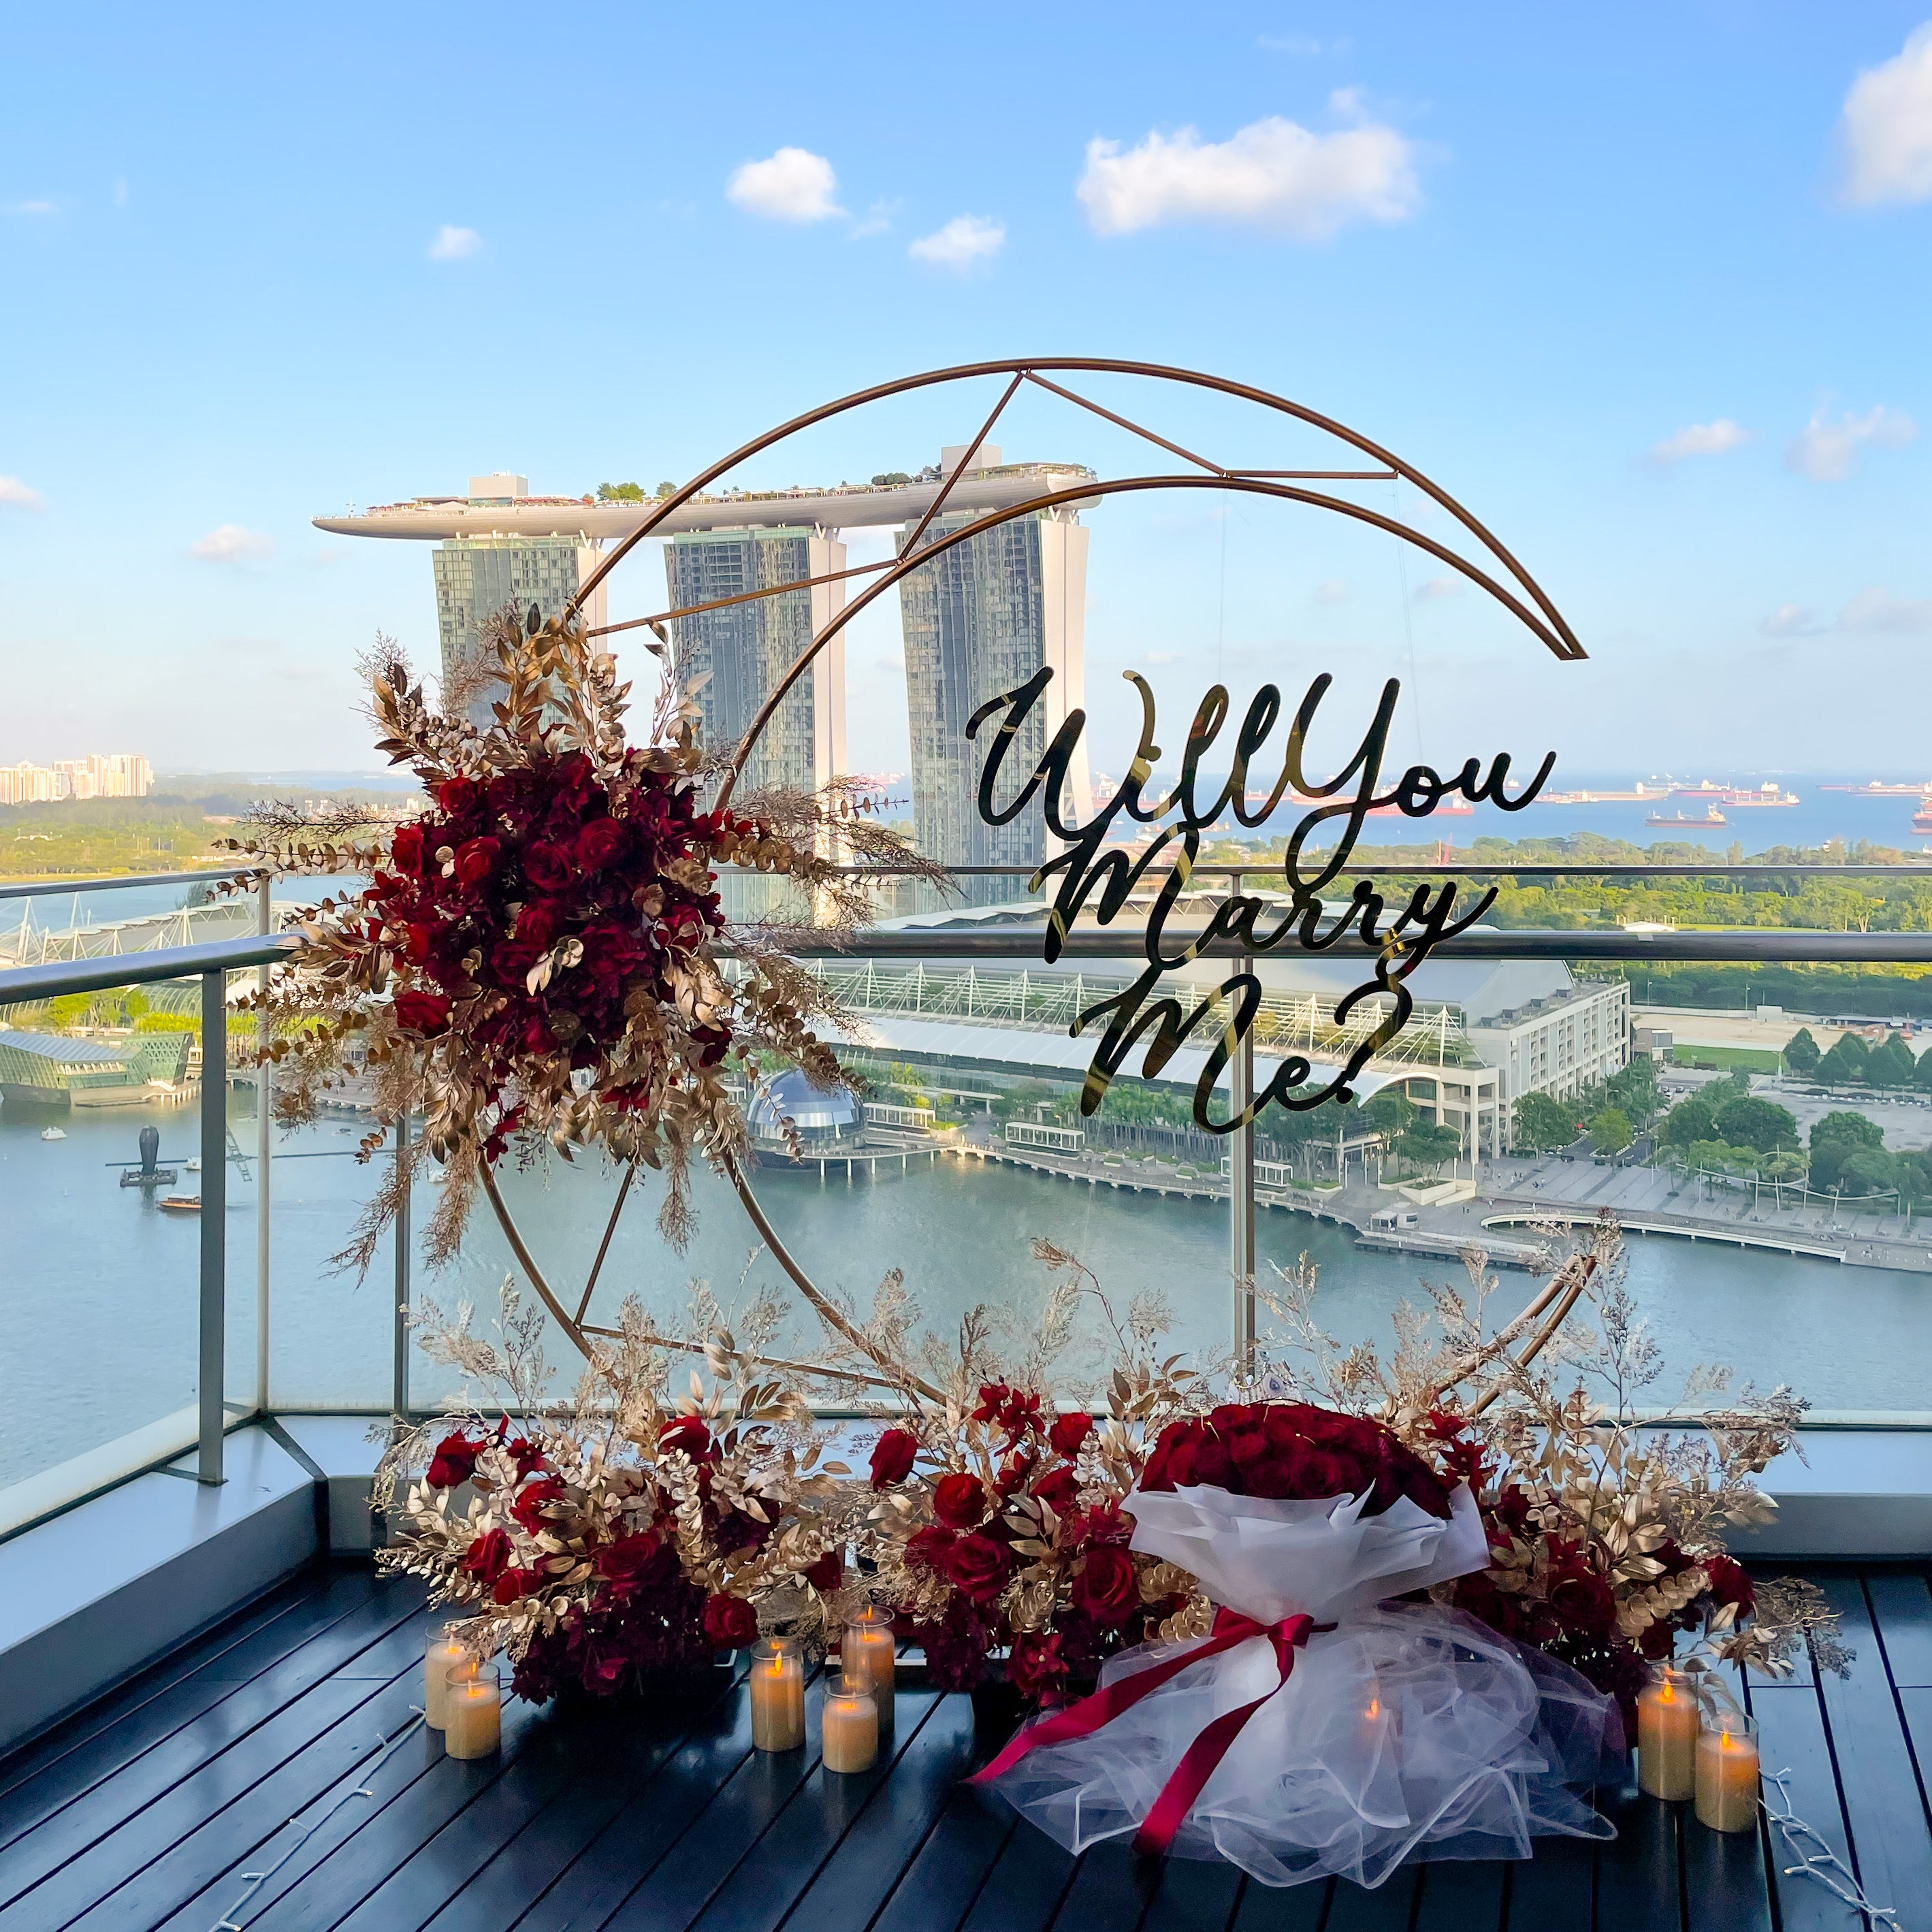 Romantic Outdoor Proposal Decor at VUE Singapore with Moon Shape Floral Arch and MBS View